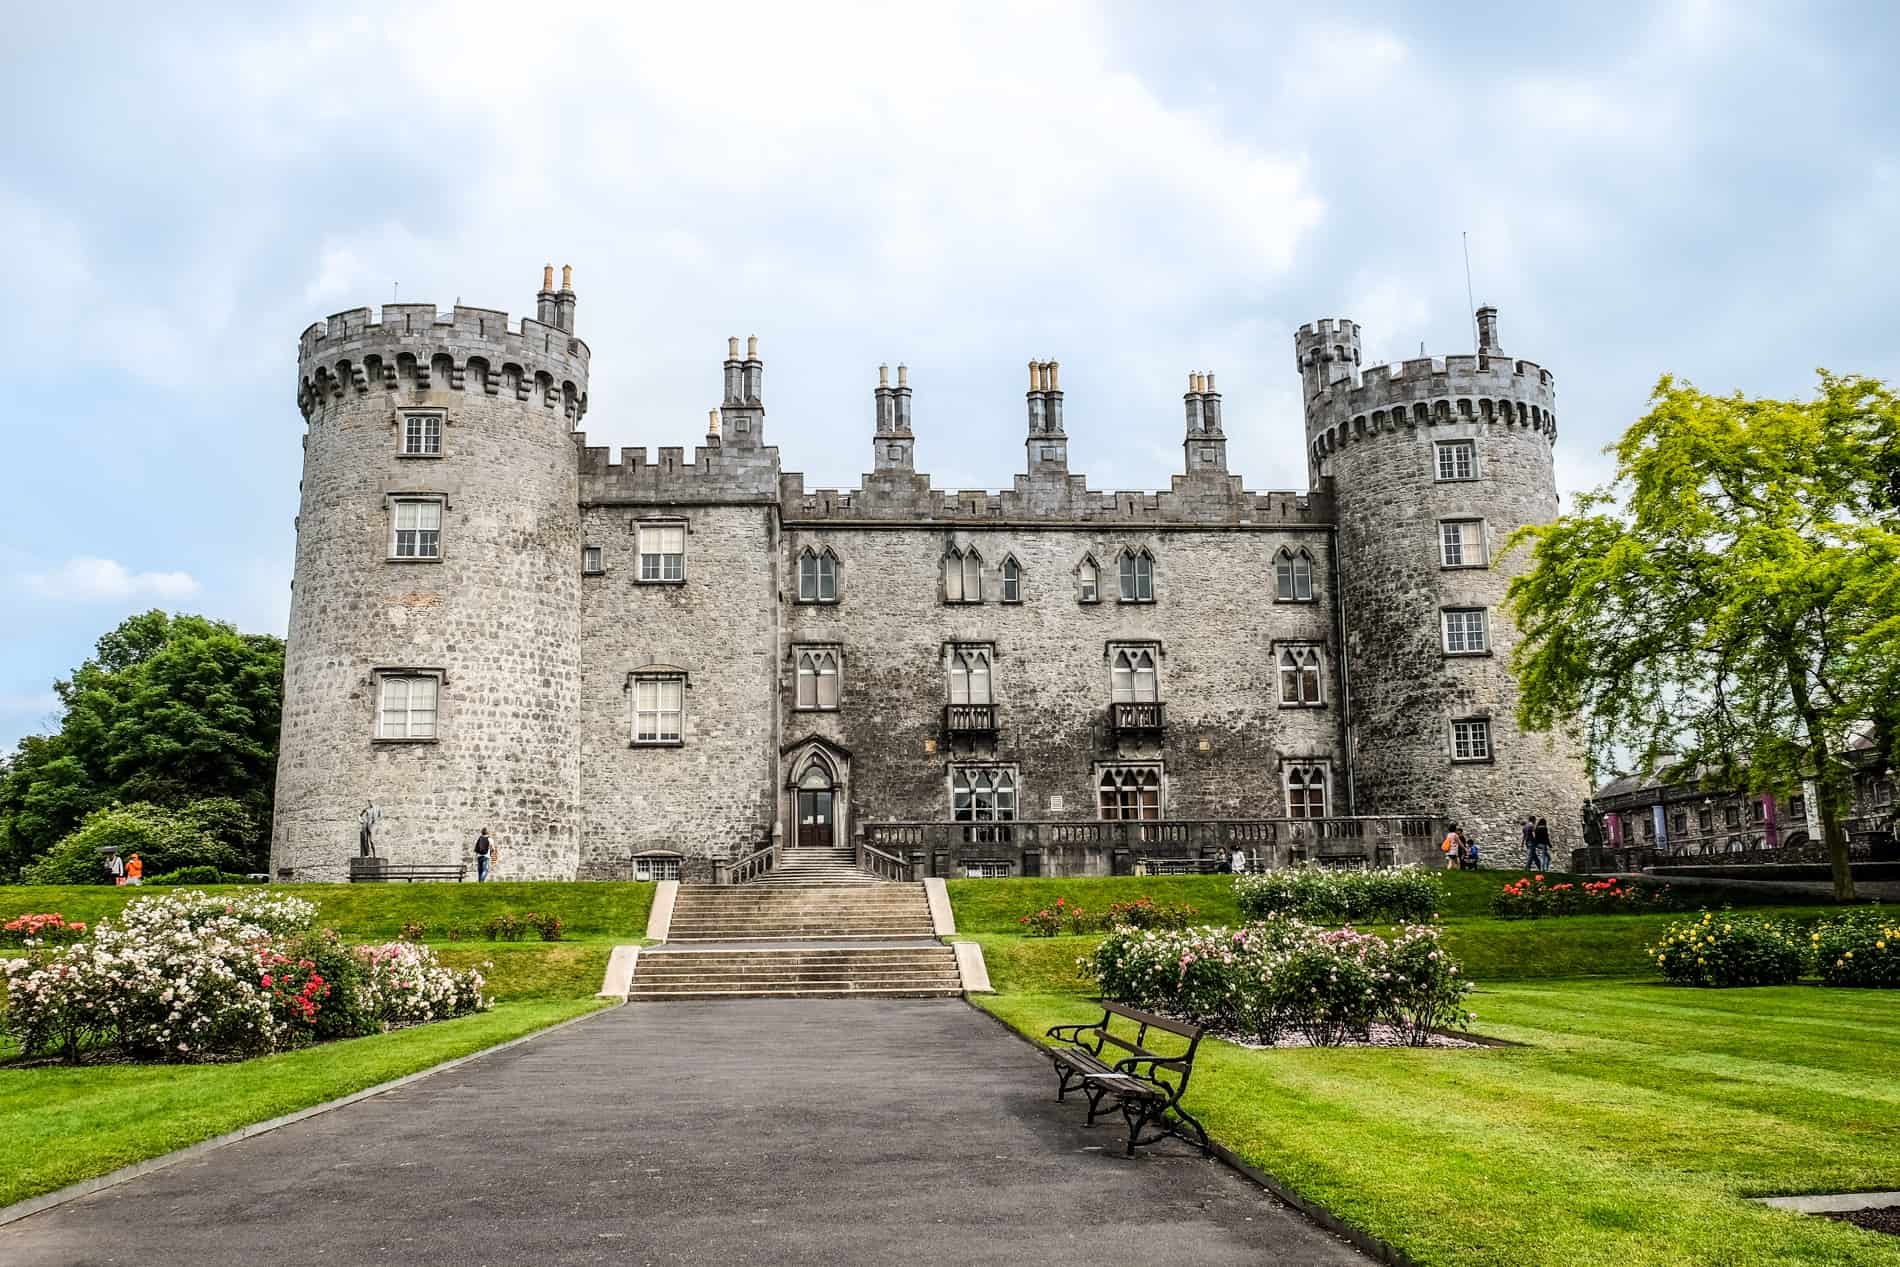 The silver stone Kilkenny Castle surrounded by manicured gardens. 